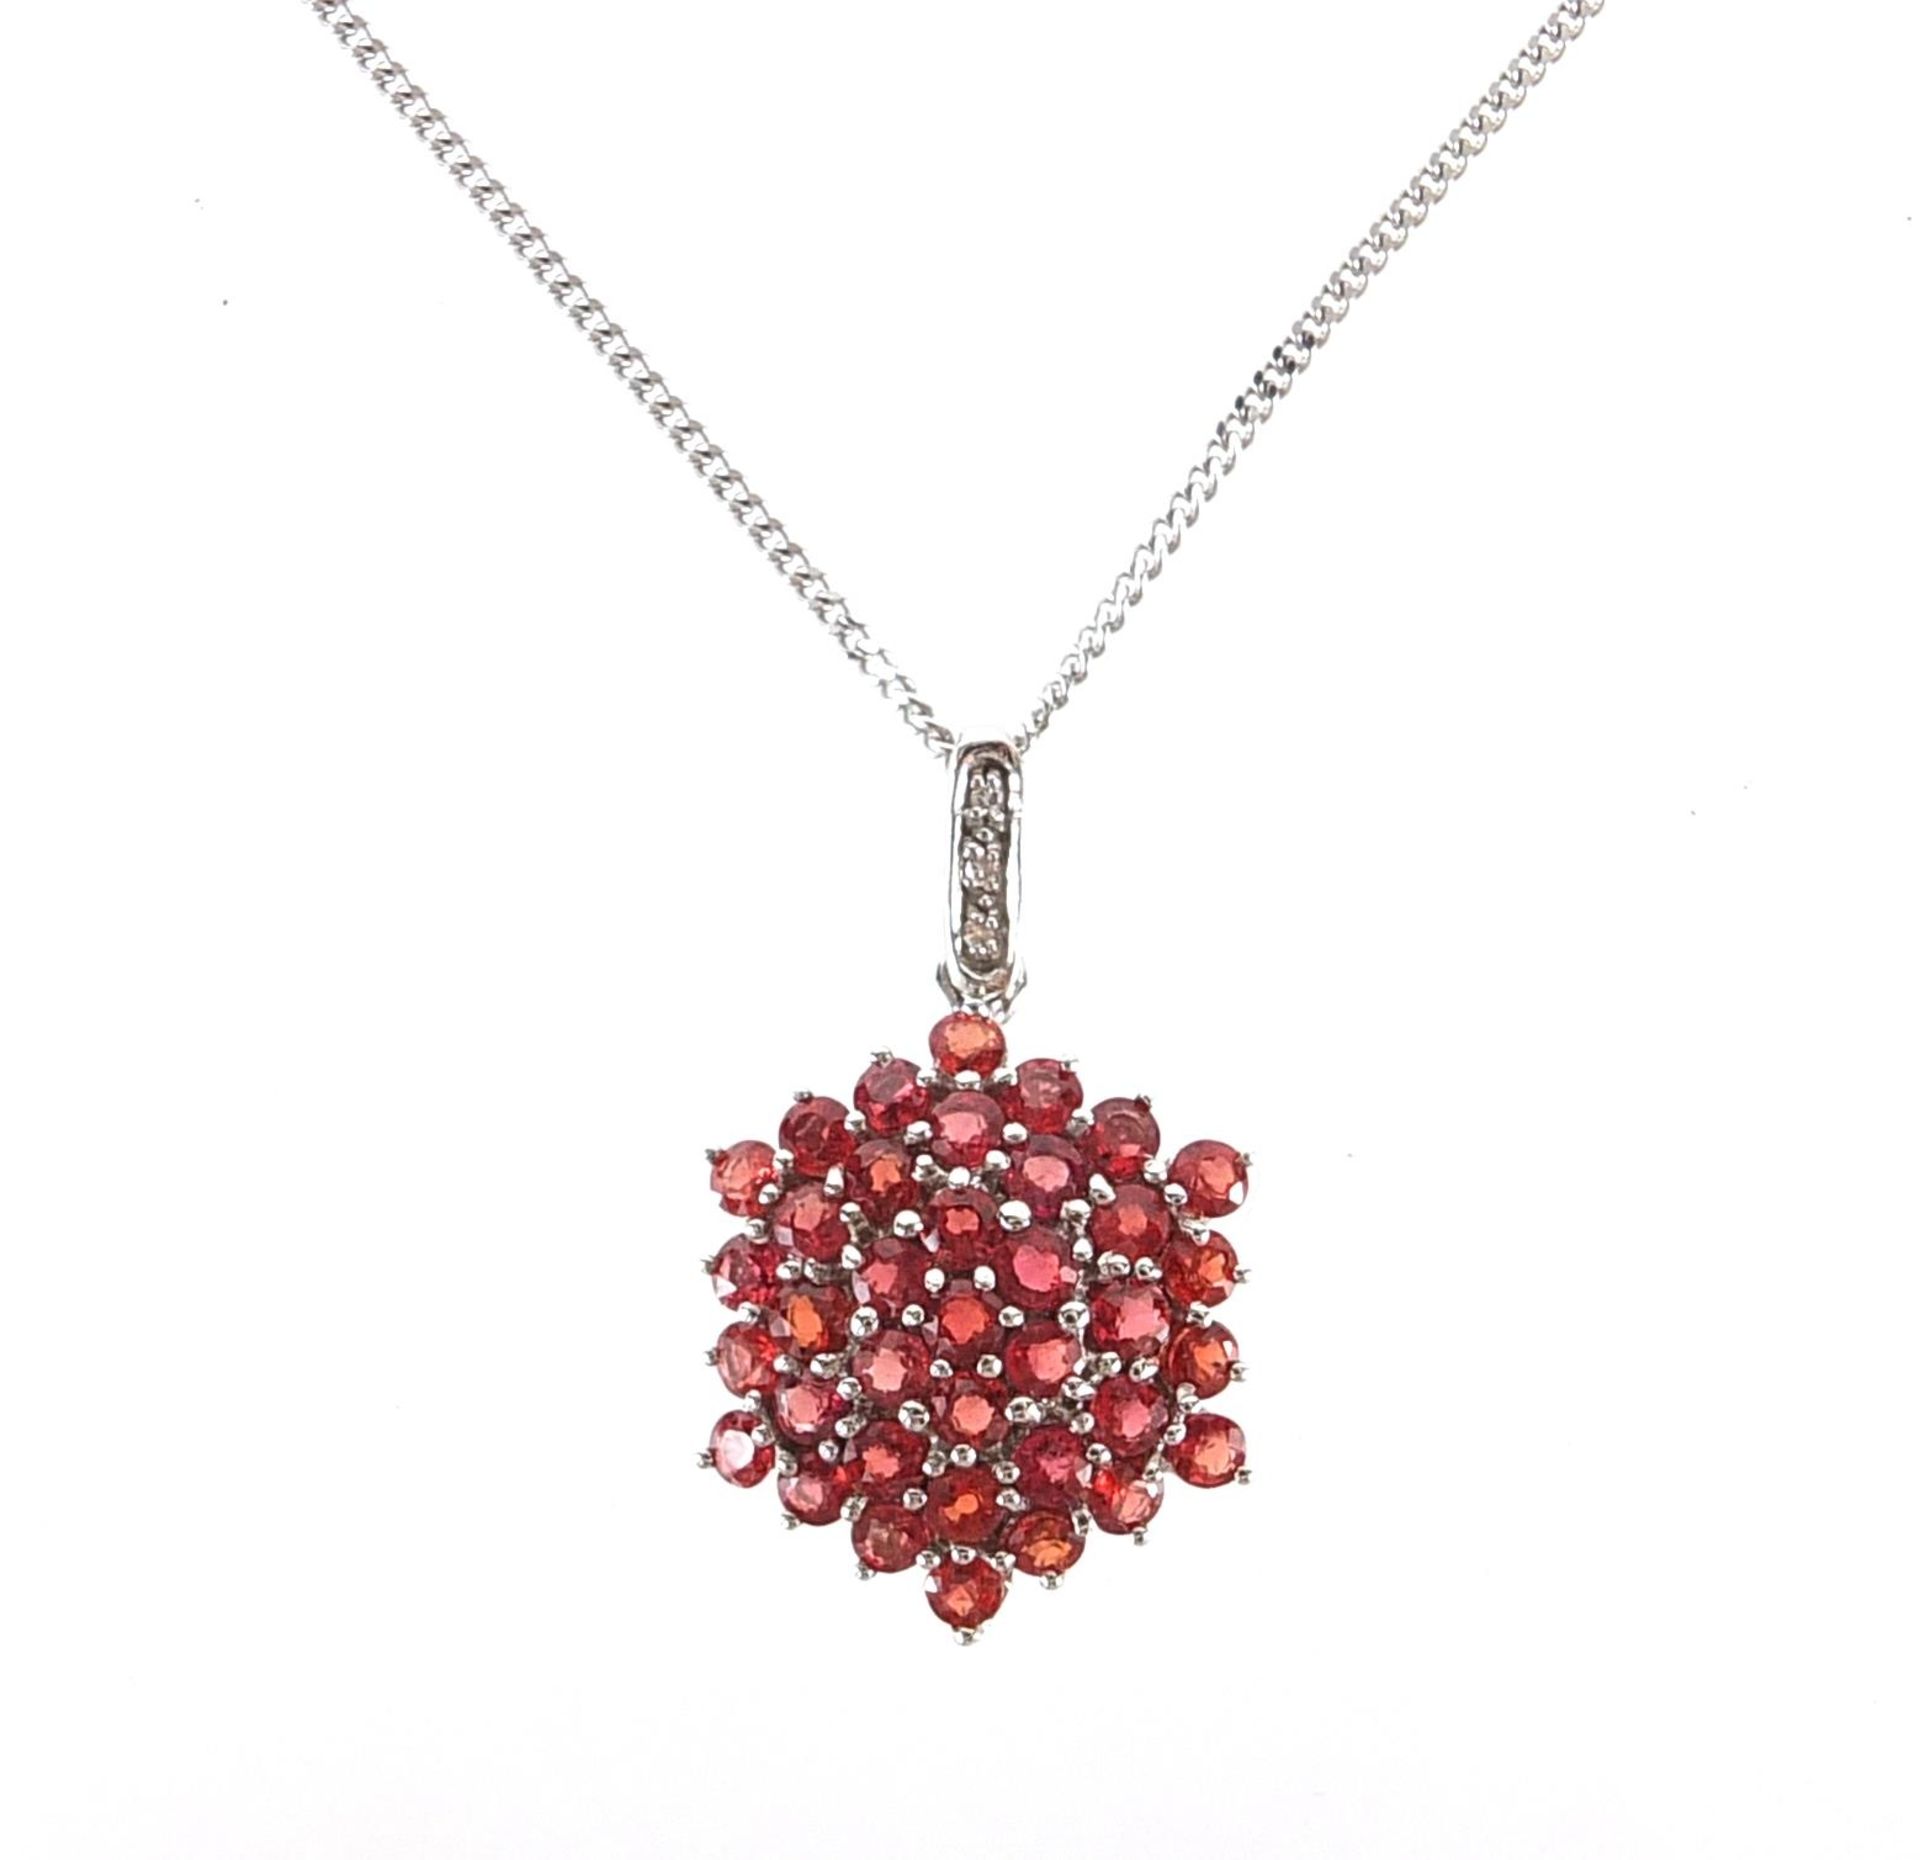 9ct white gold garnet and diamond cluster pendant on a 9ct white gold necklace, 2.9cm high and